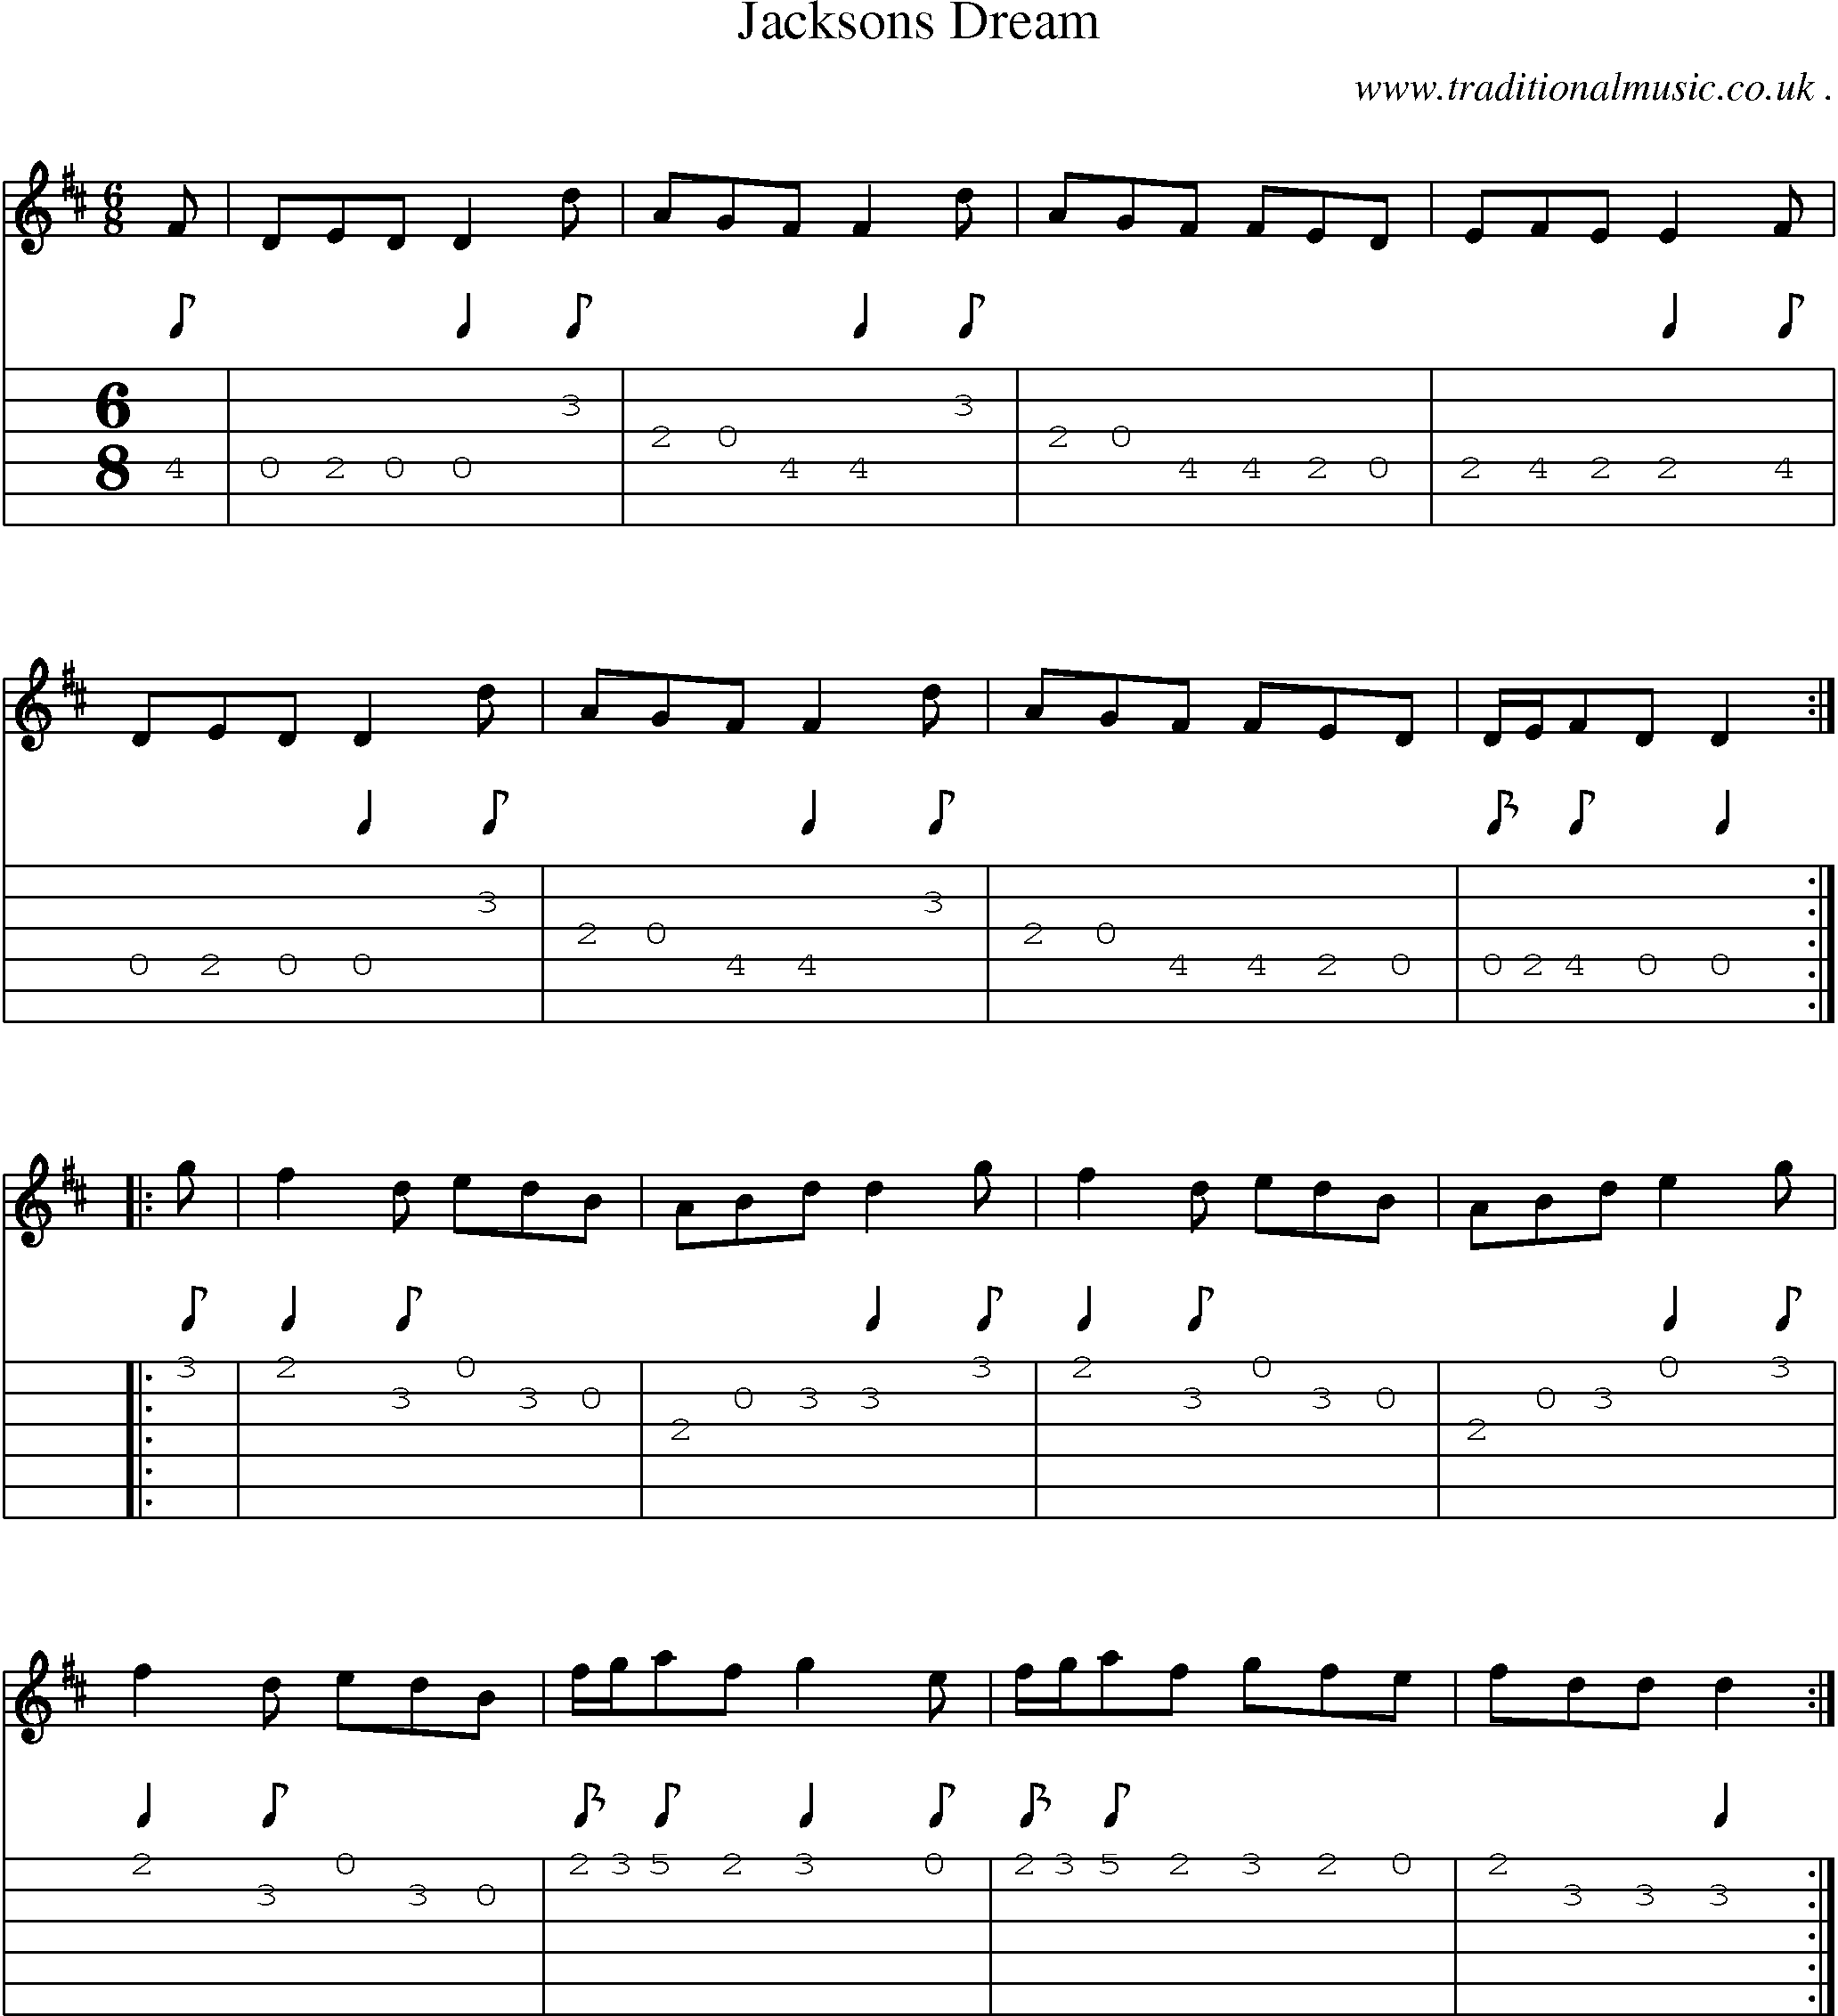 Sheet-Music and Guitar Tabs for Jacksons Dream